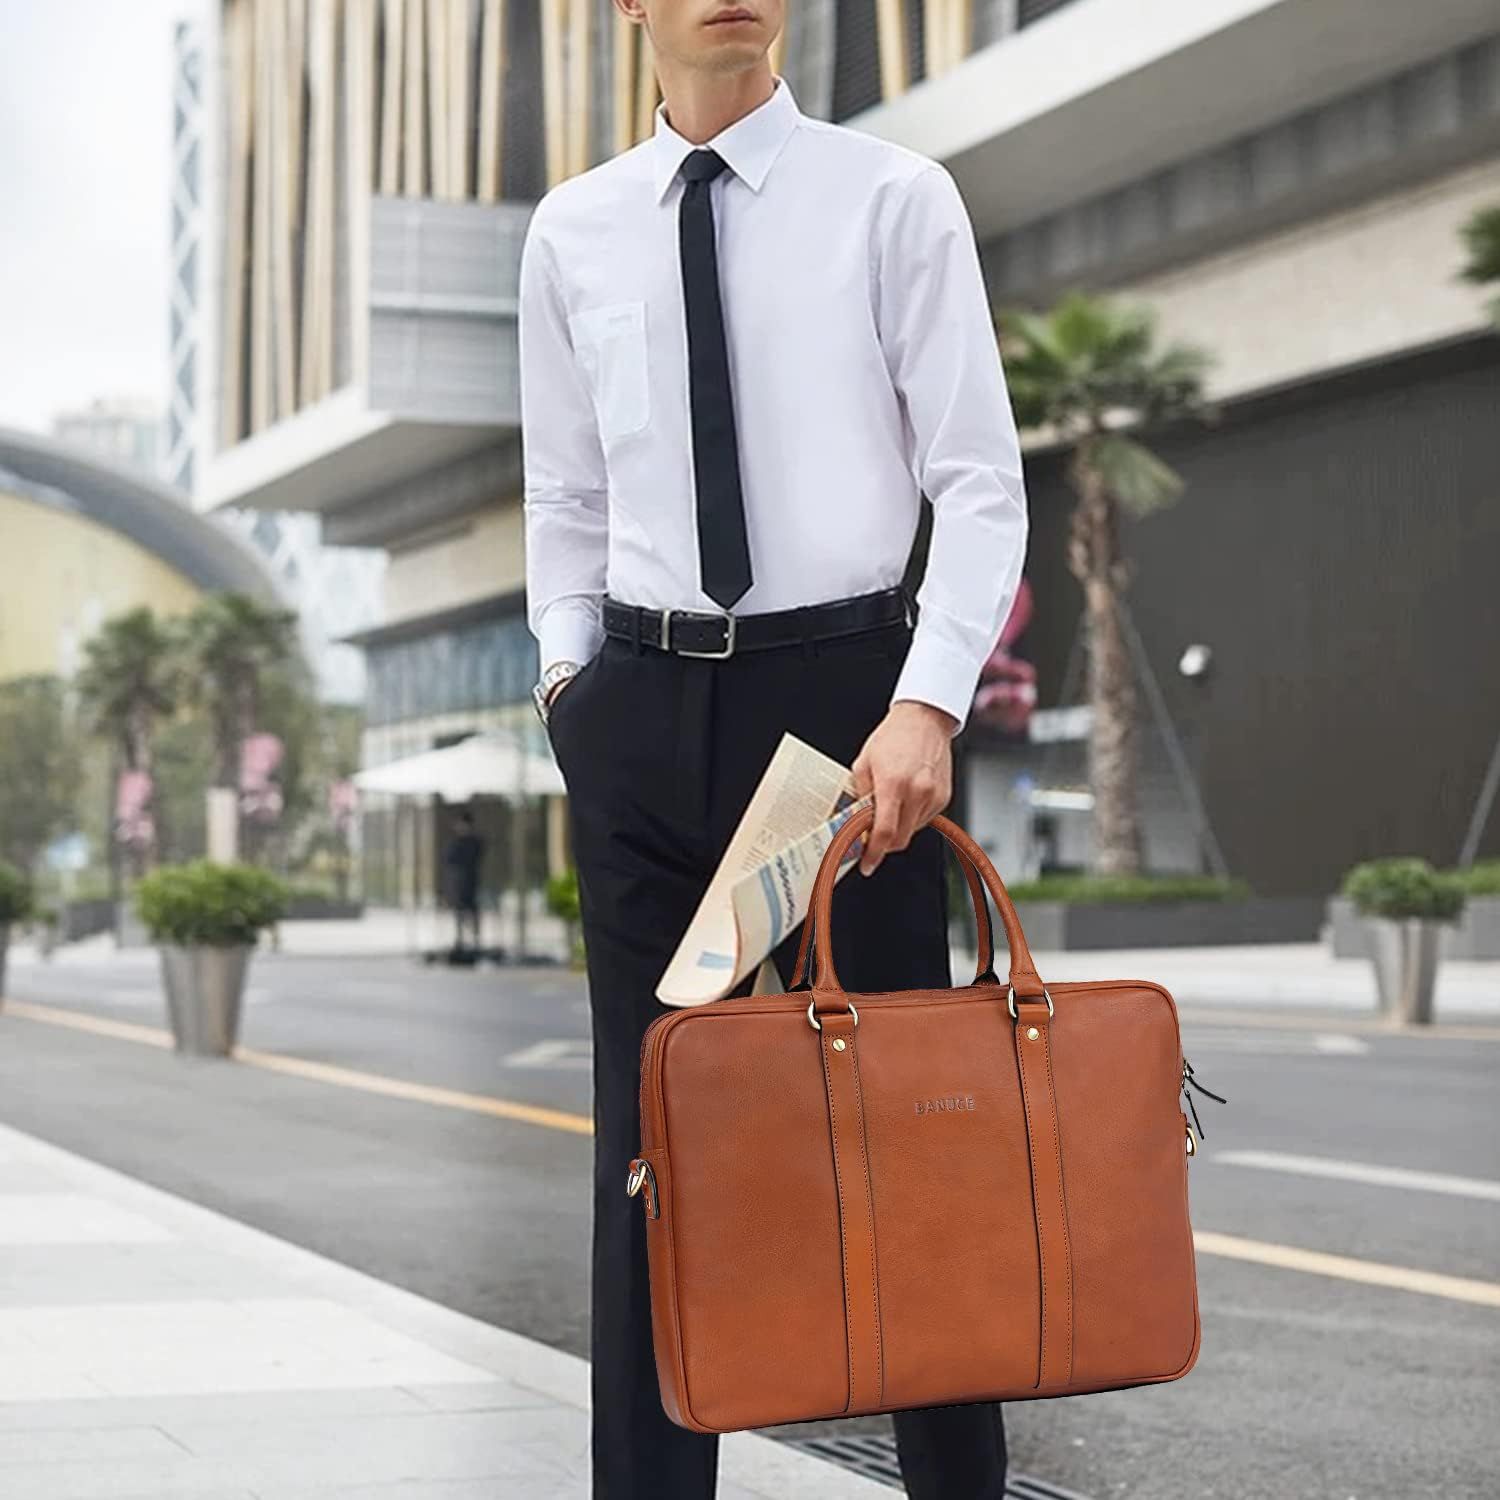 Attache　Bag　Case　Lock　Bags,　Men　Lawyer　Bags,　Carousell　Inch　on　Banuce　Doctor　Litigator　Laptop　Hard　Attorney　Leather　Briefcase　15.6　Briefcases　for　Fashion,　with　Men's